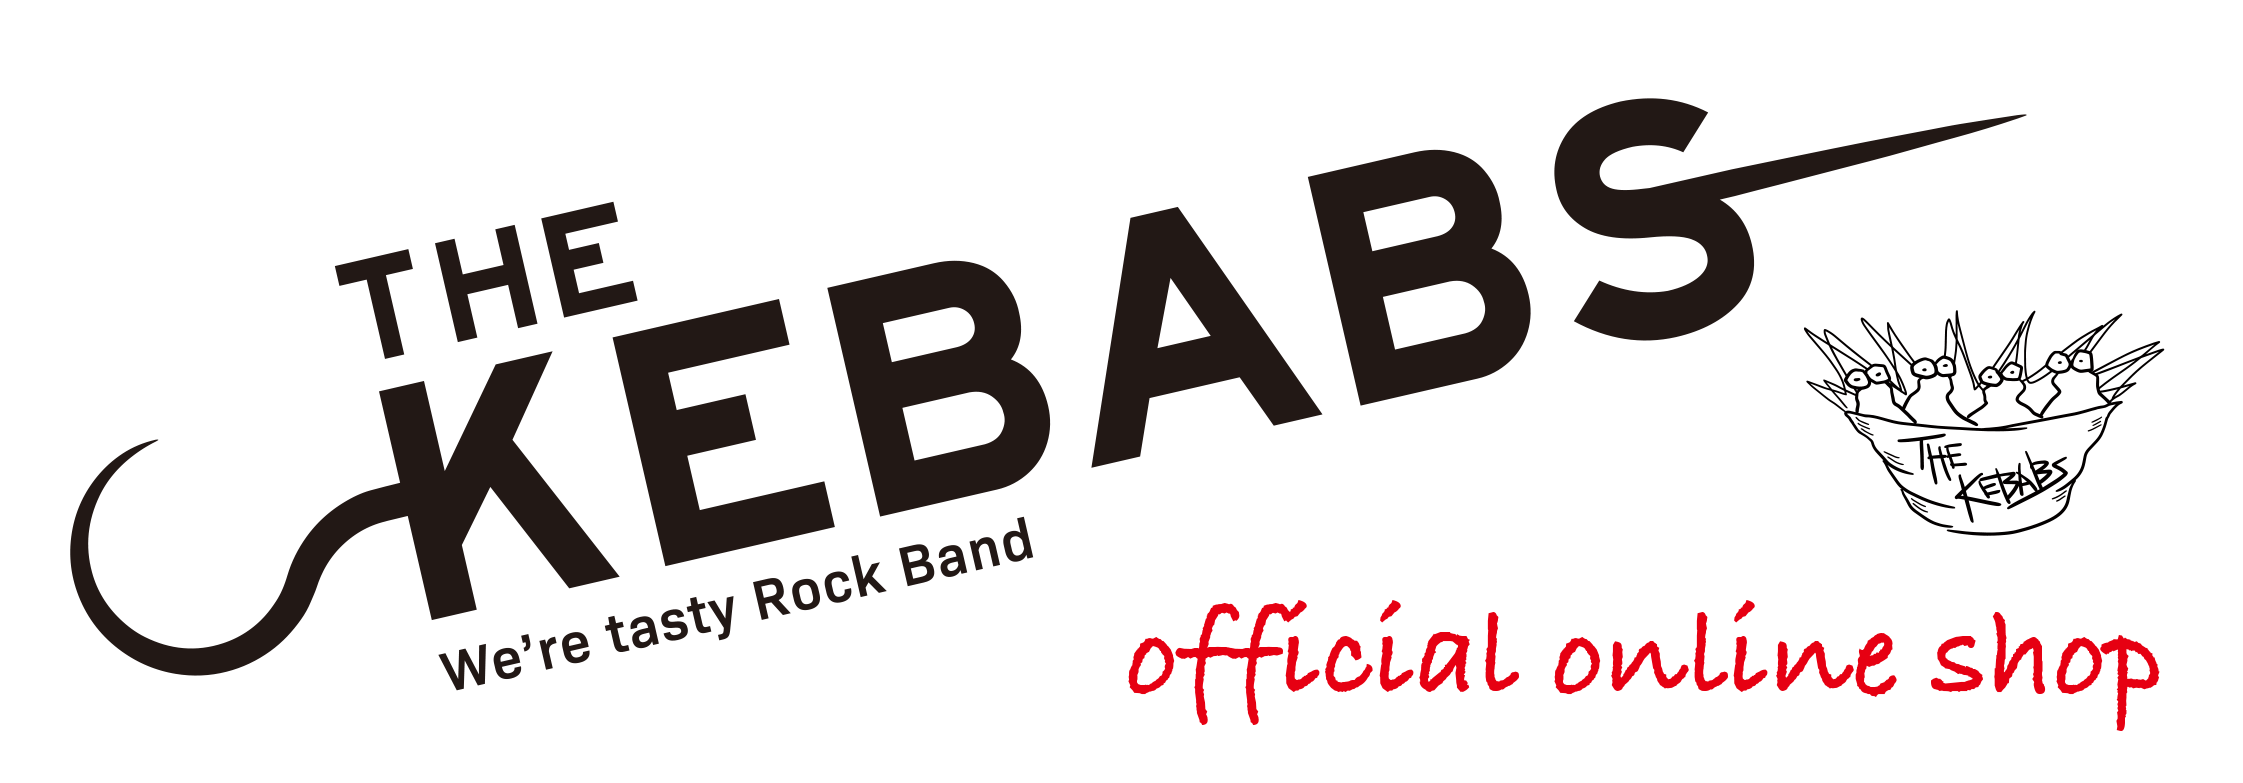 THE KEBABS official online shop